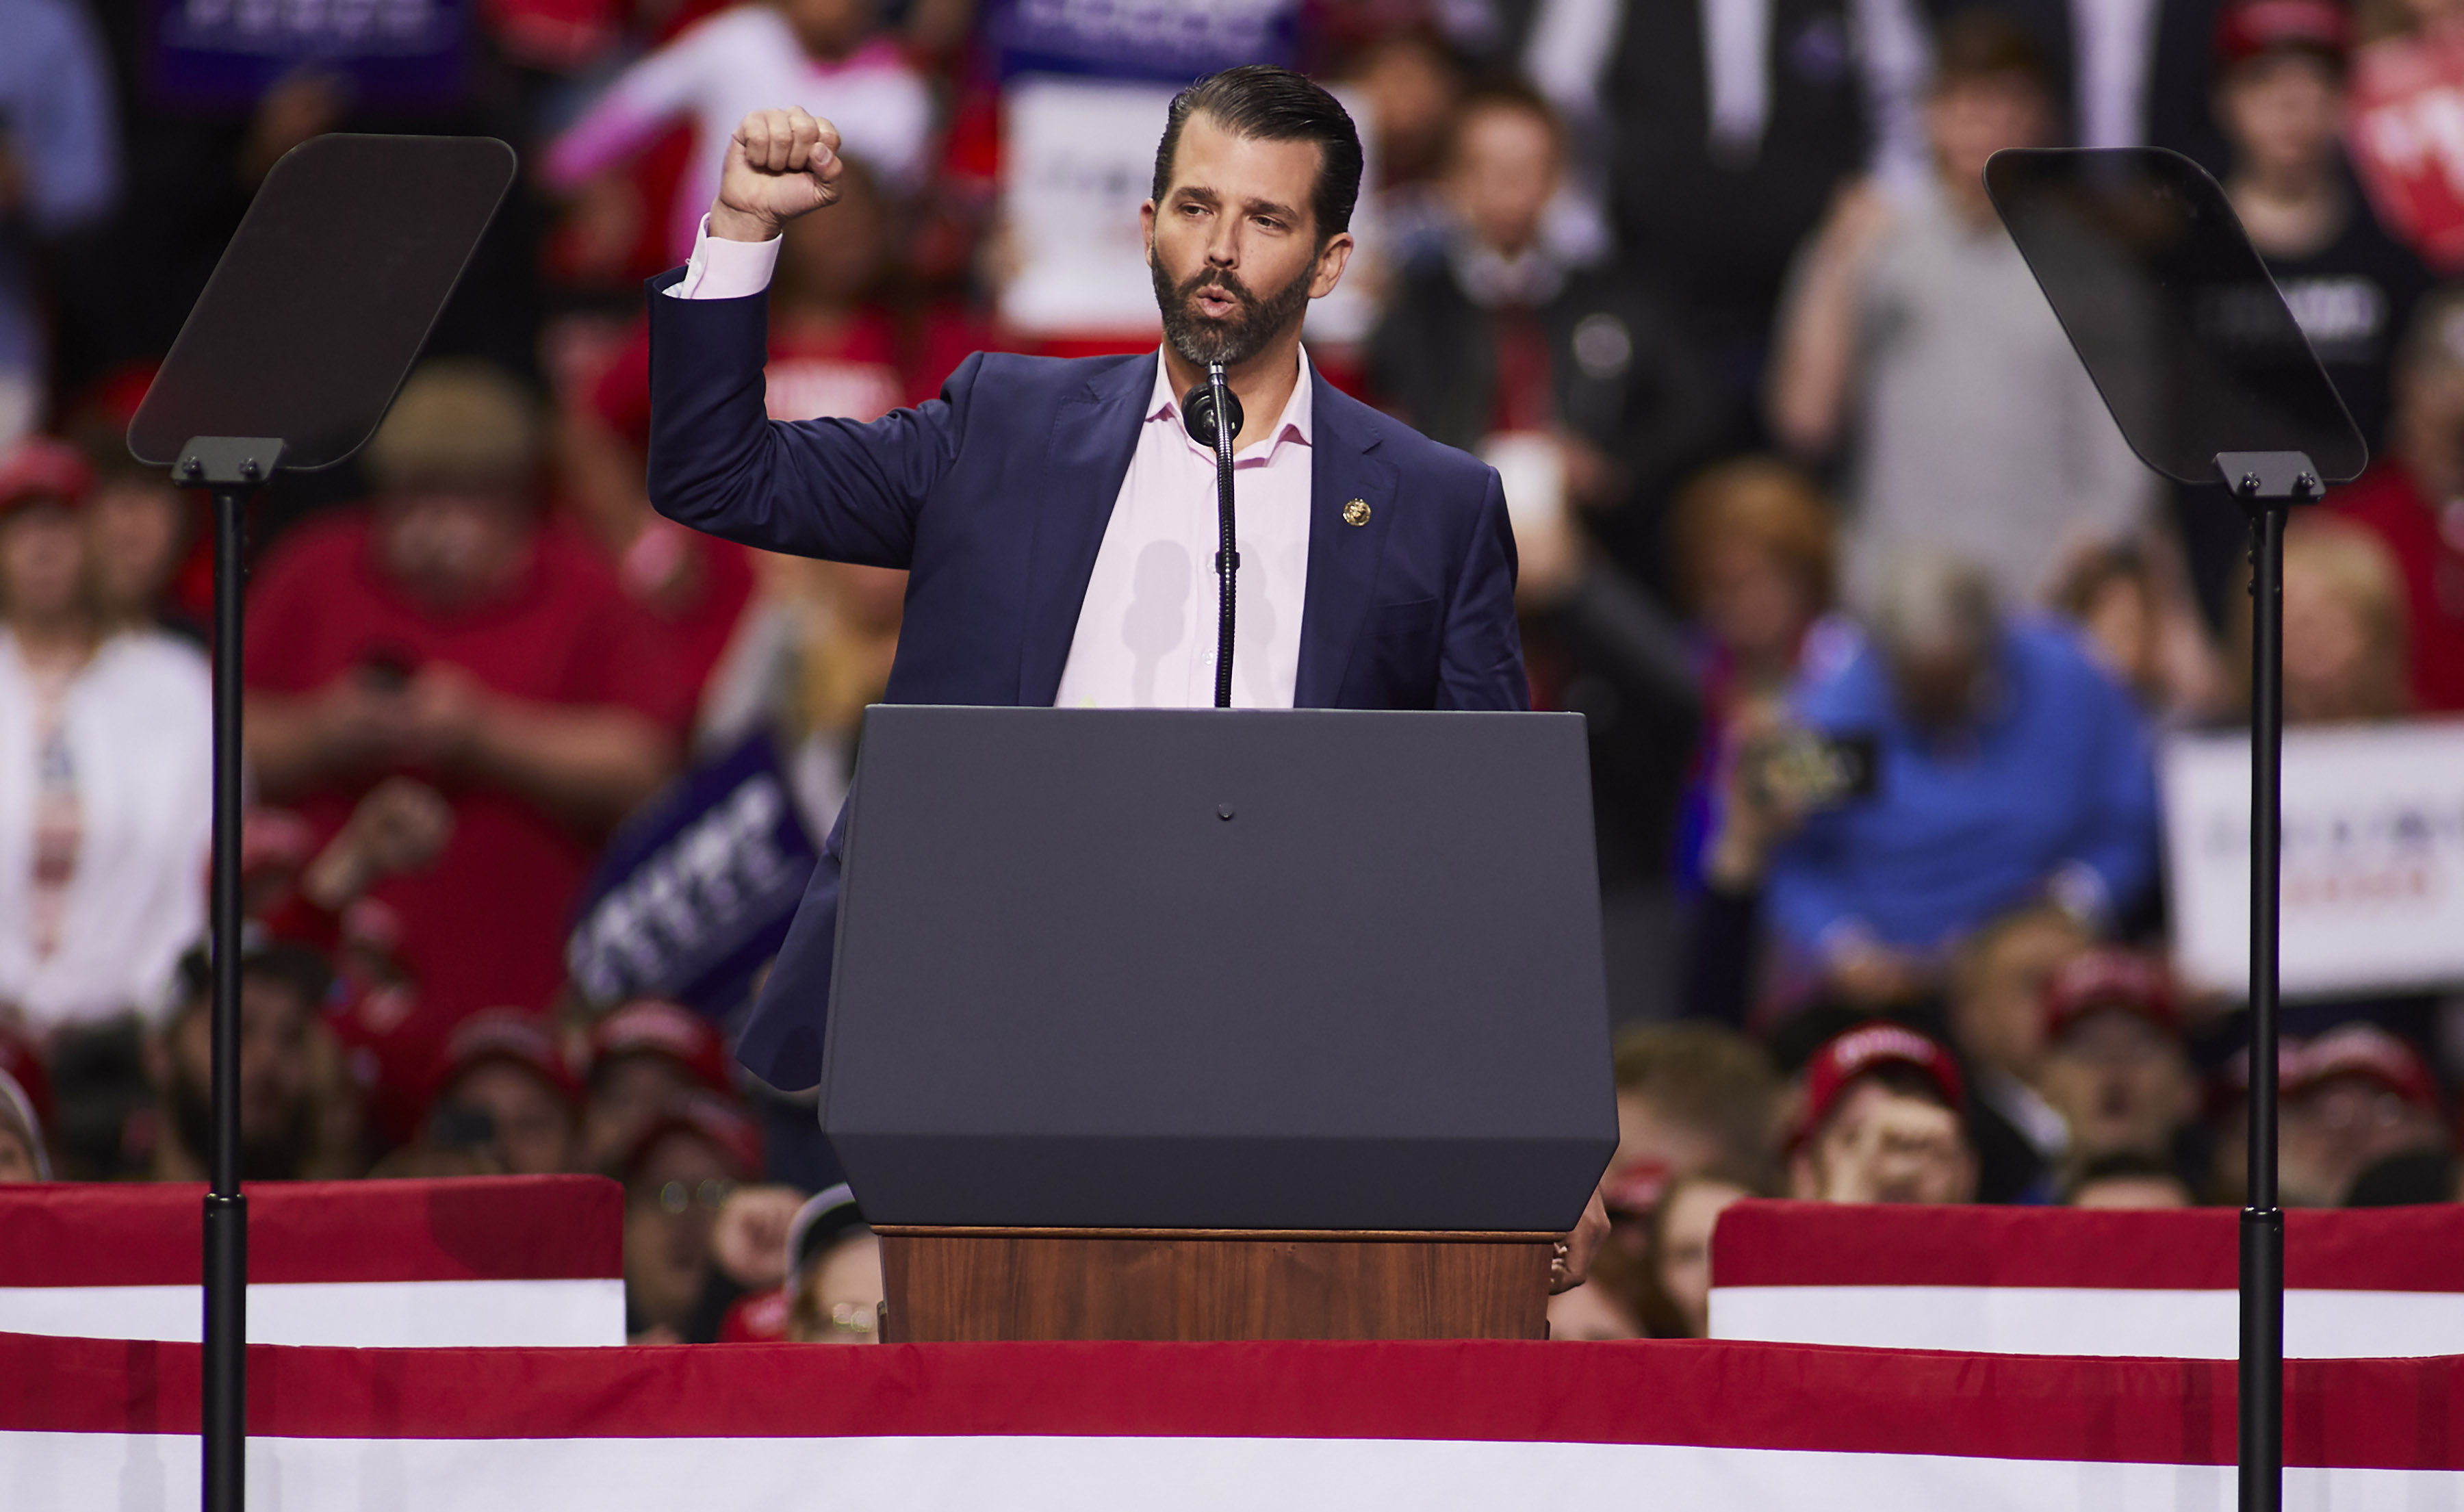 Donald Trump Jr. greets supporters of US President Donald Trump before he speaks at a Make America Great Again rally on April 27, 2019 in Green Bay, Wisconsin. (Darren Hauck&mdash;Getty Images)